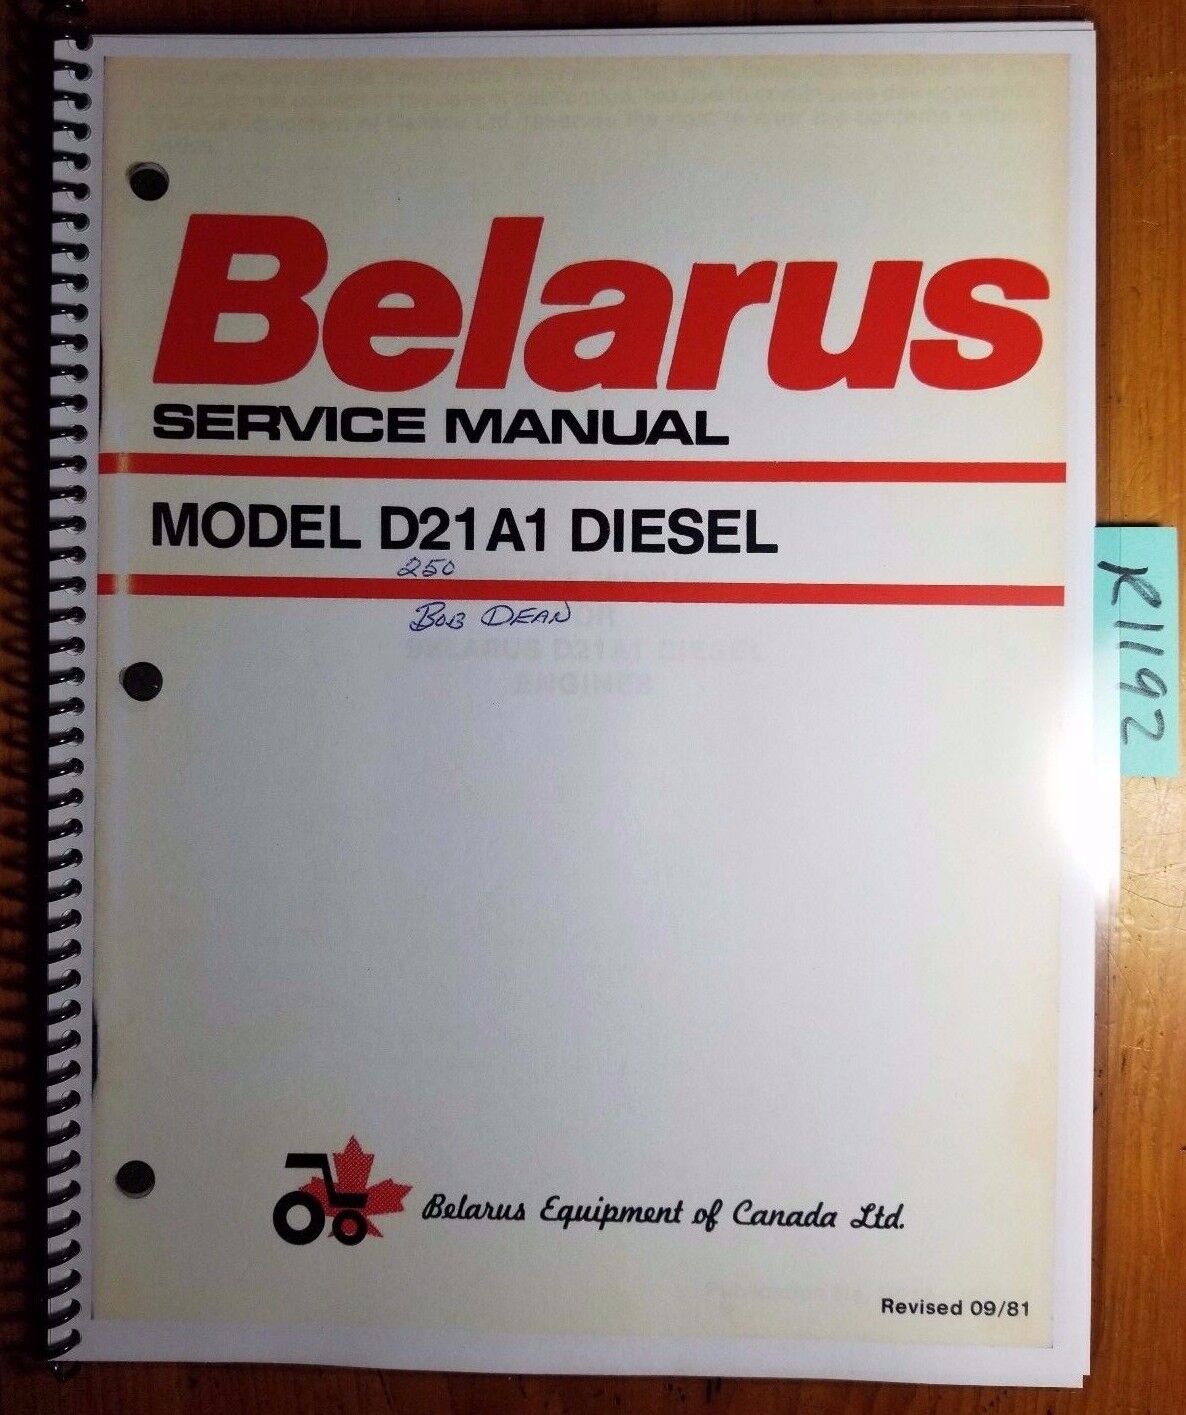 Belarus D21A1 Diesel Service Manual for the 250 Tractor D21A1 Ser 2 9/81